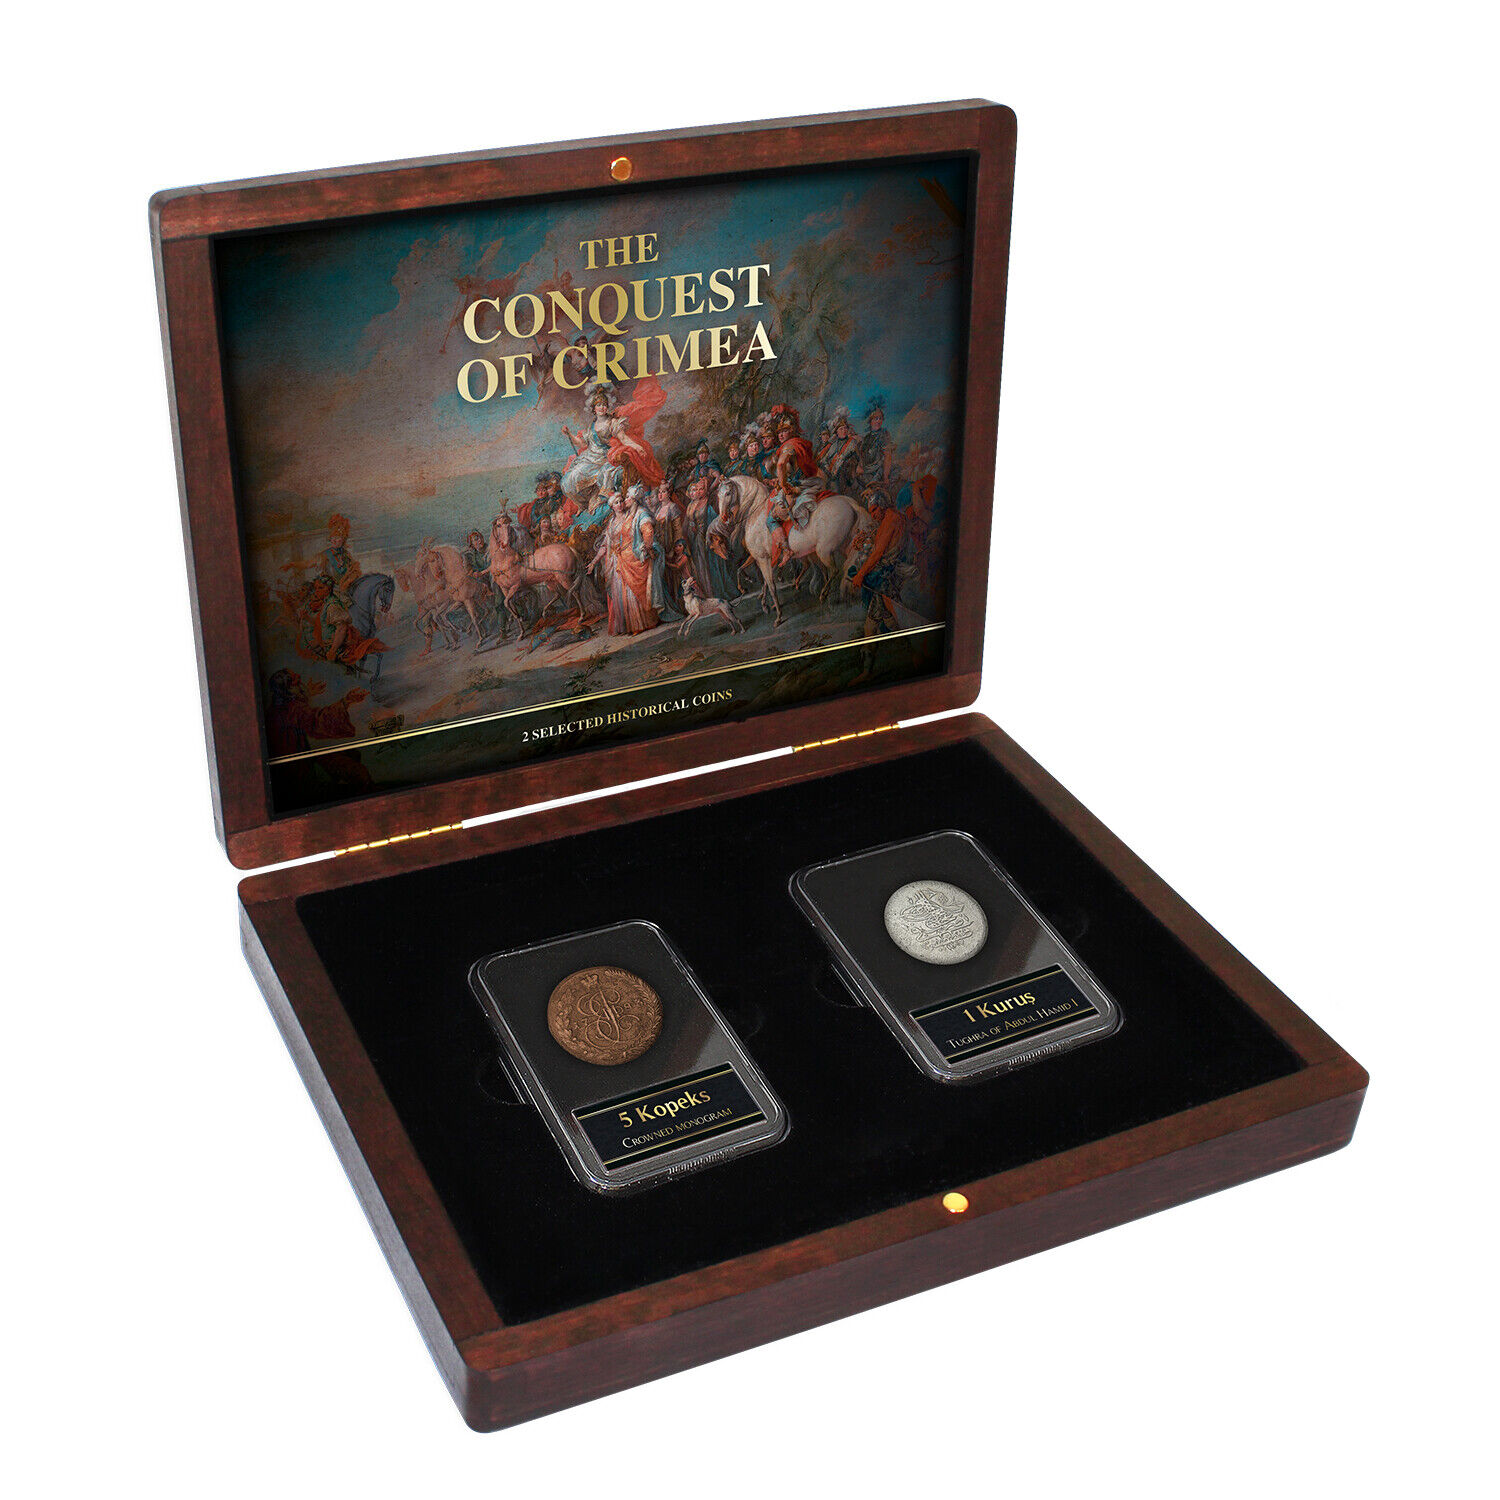 Authentic Genuine Collectable Coins The Conquest of Crimea Collection